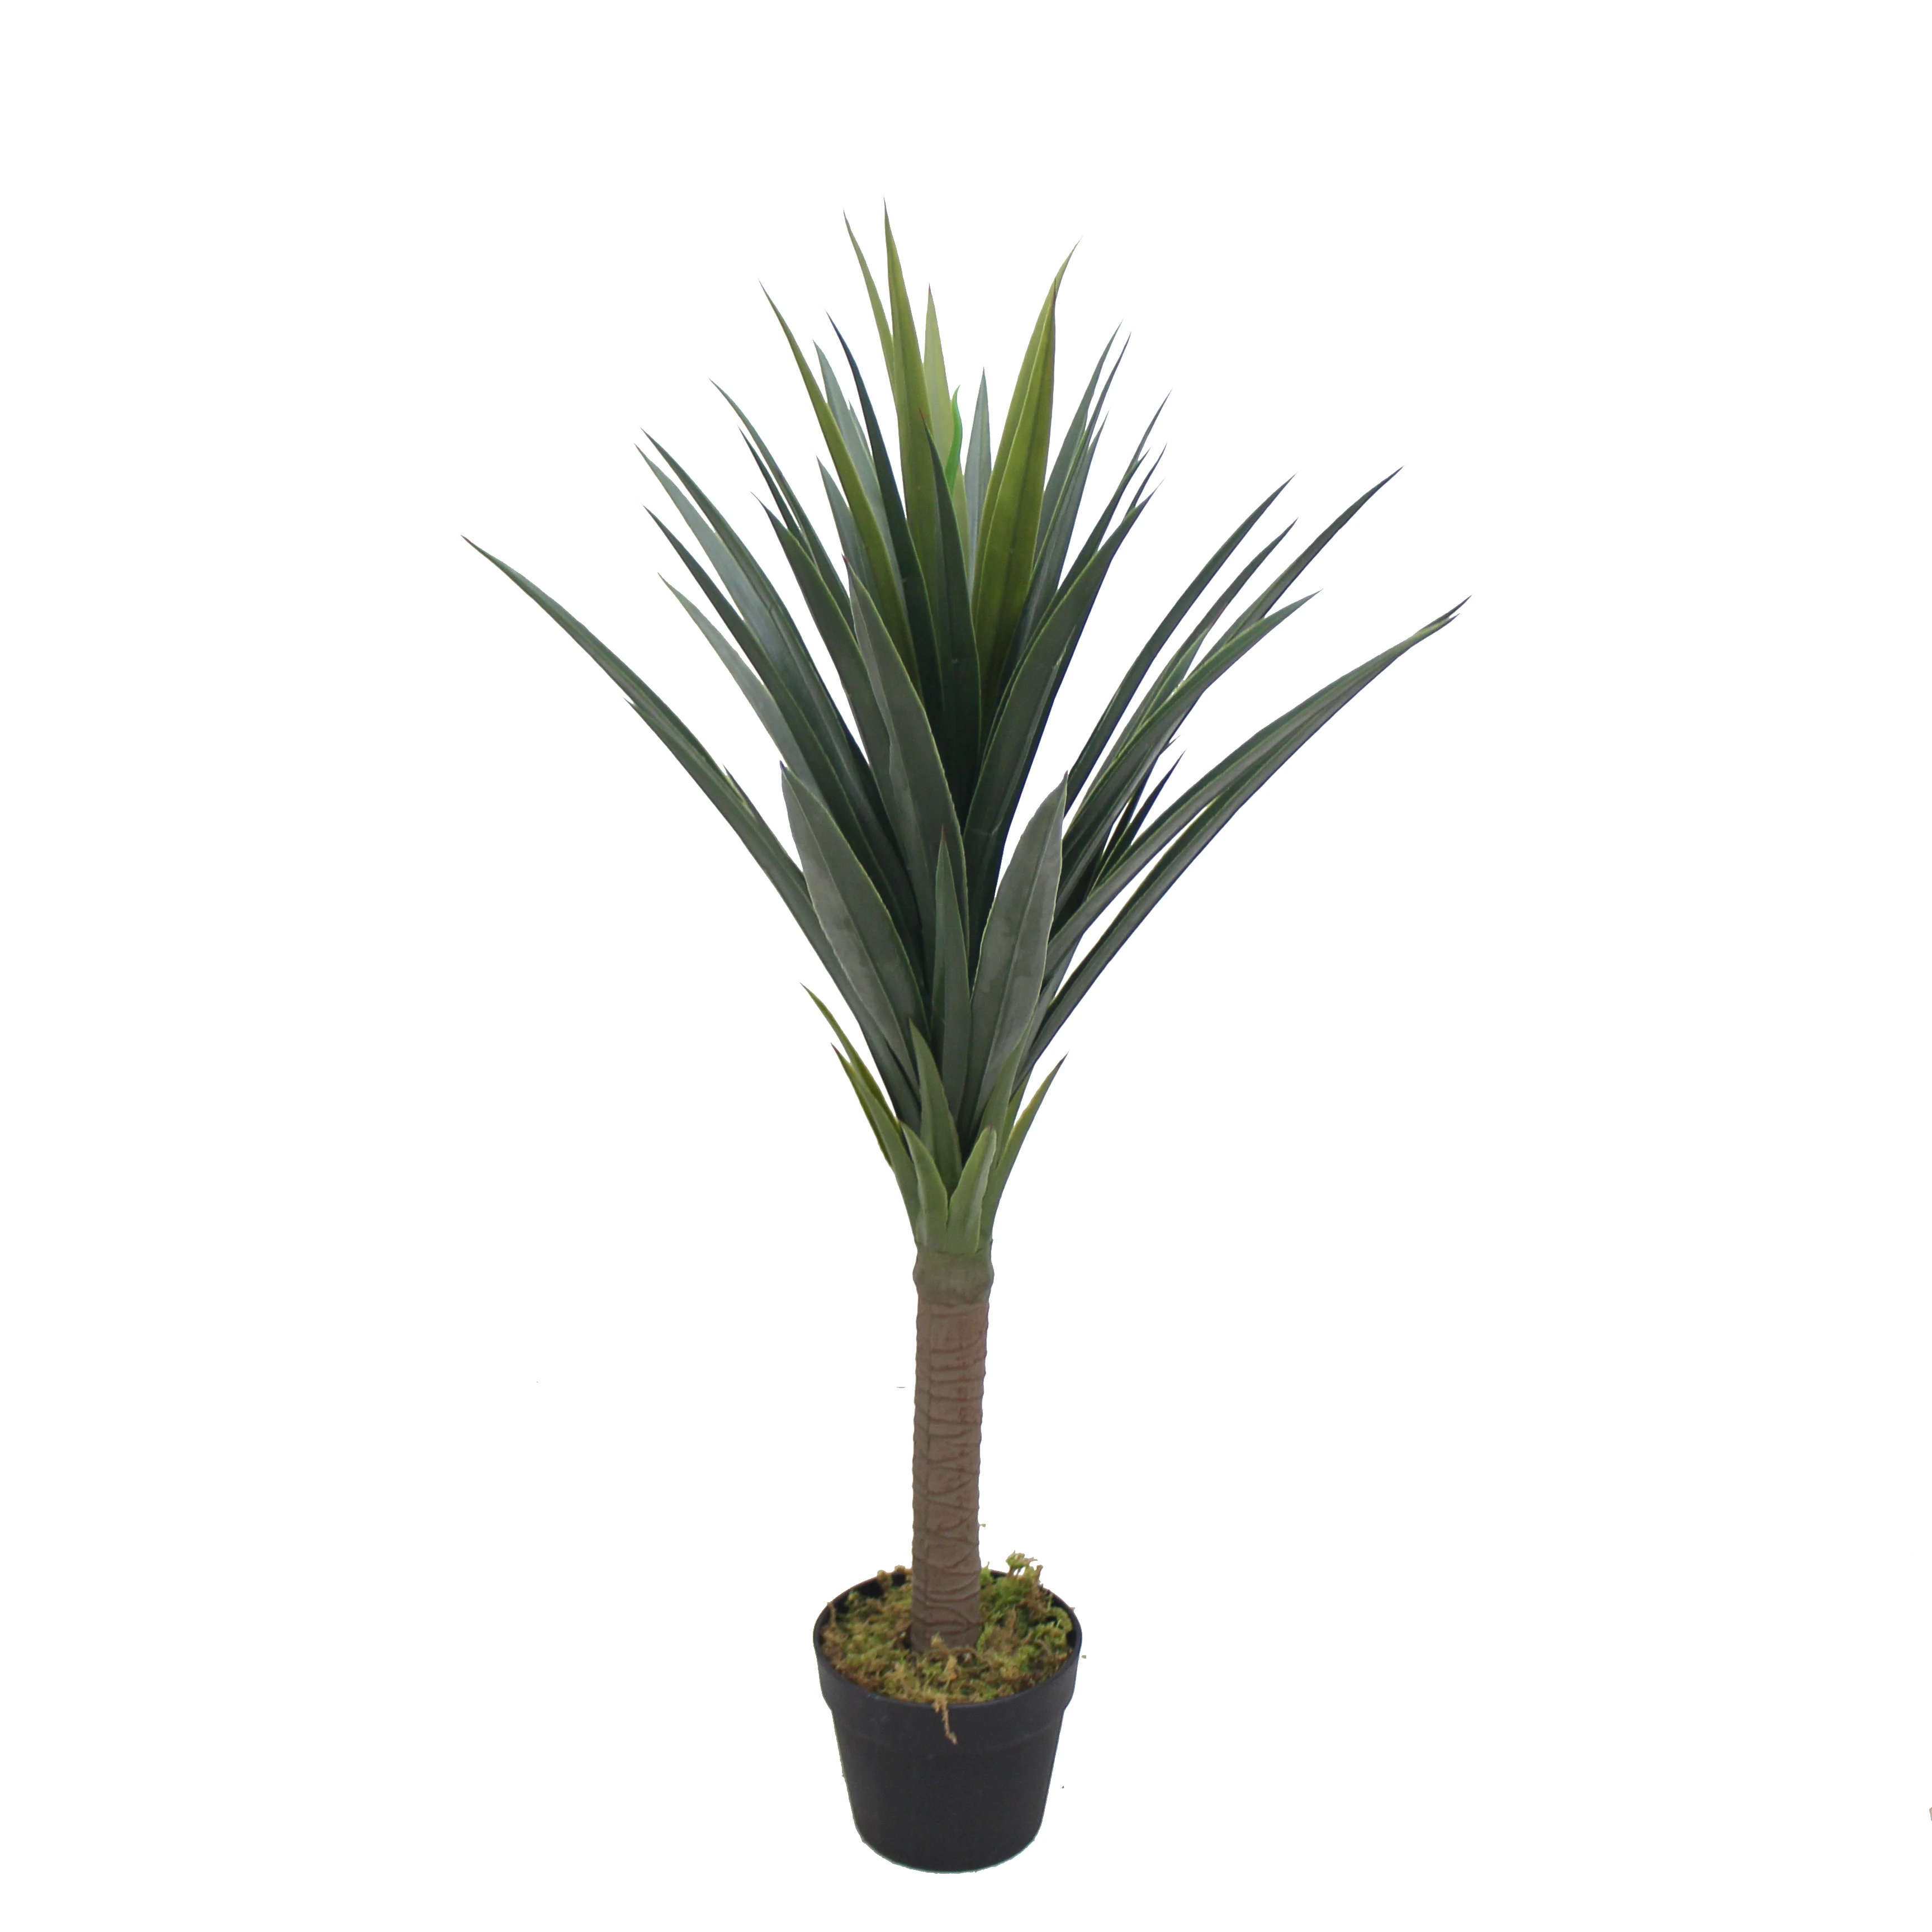 New Arrival Factory Artificial Yucca Plant For Sale   Buy Yucca ...